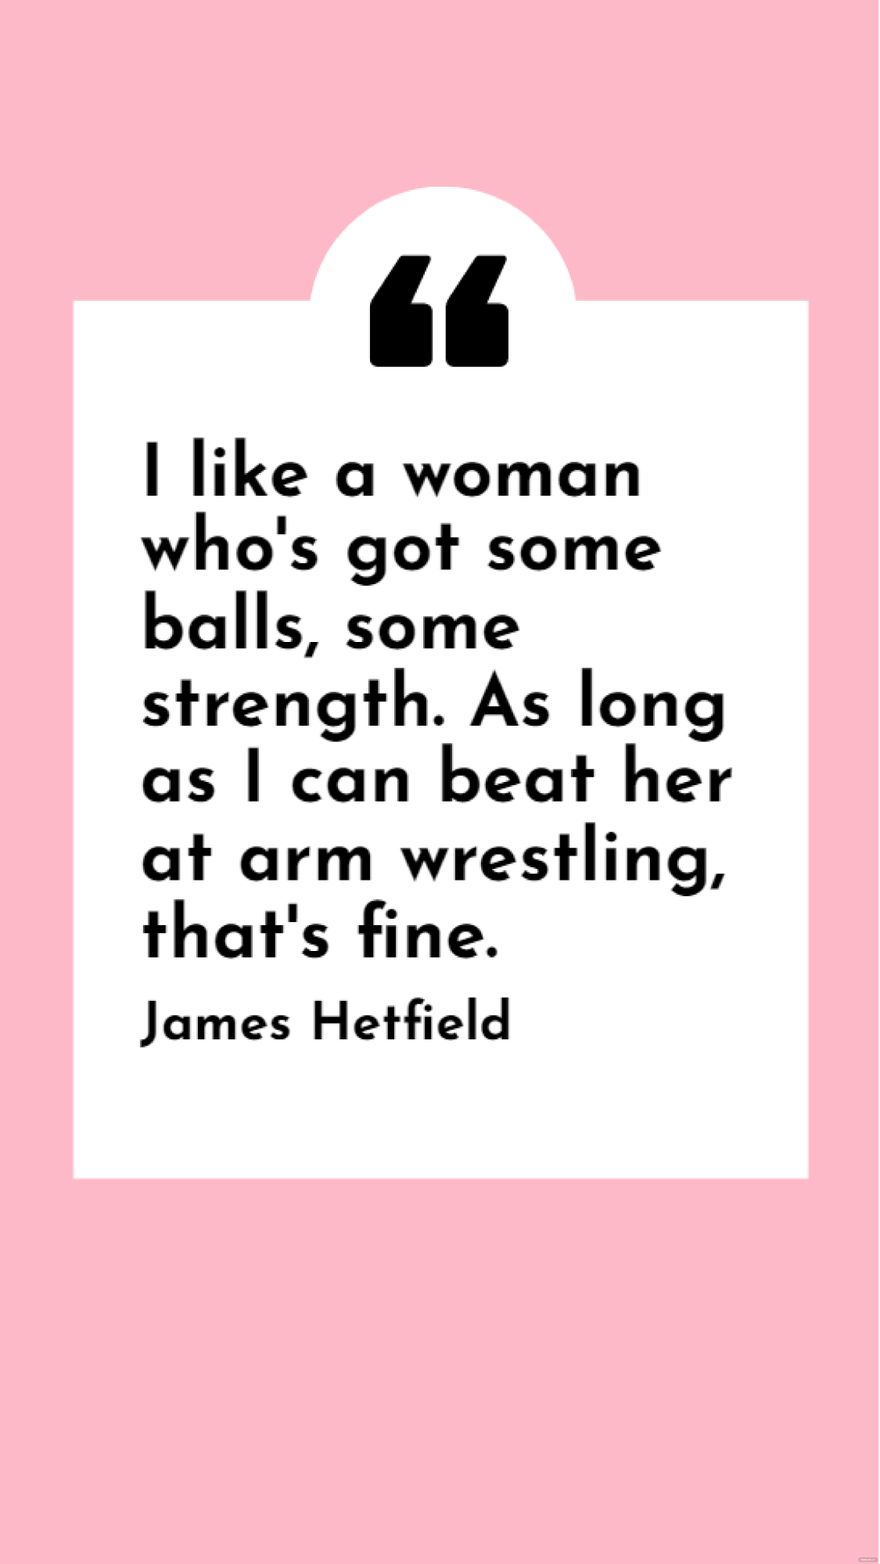 James Hetfield - I like a women who's got some balls, some strength. As long as I can beat her at arm wrestling, that's fine.